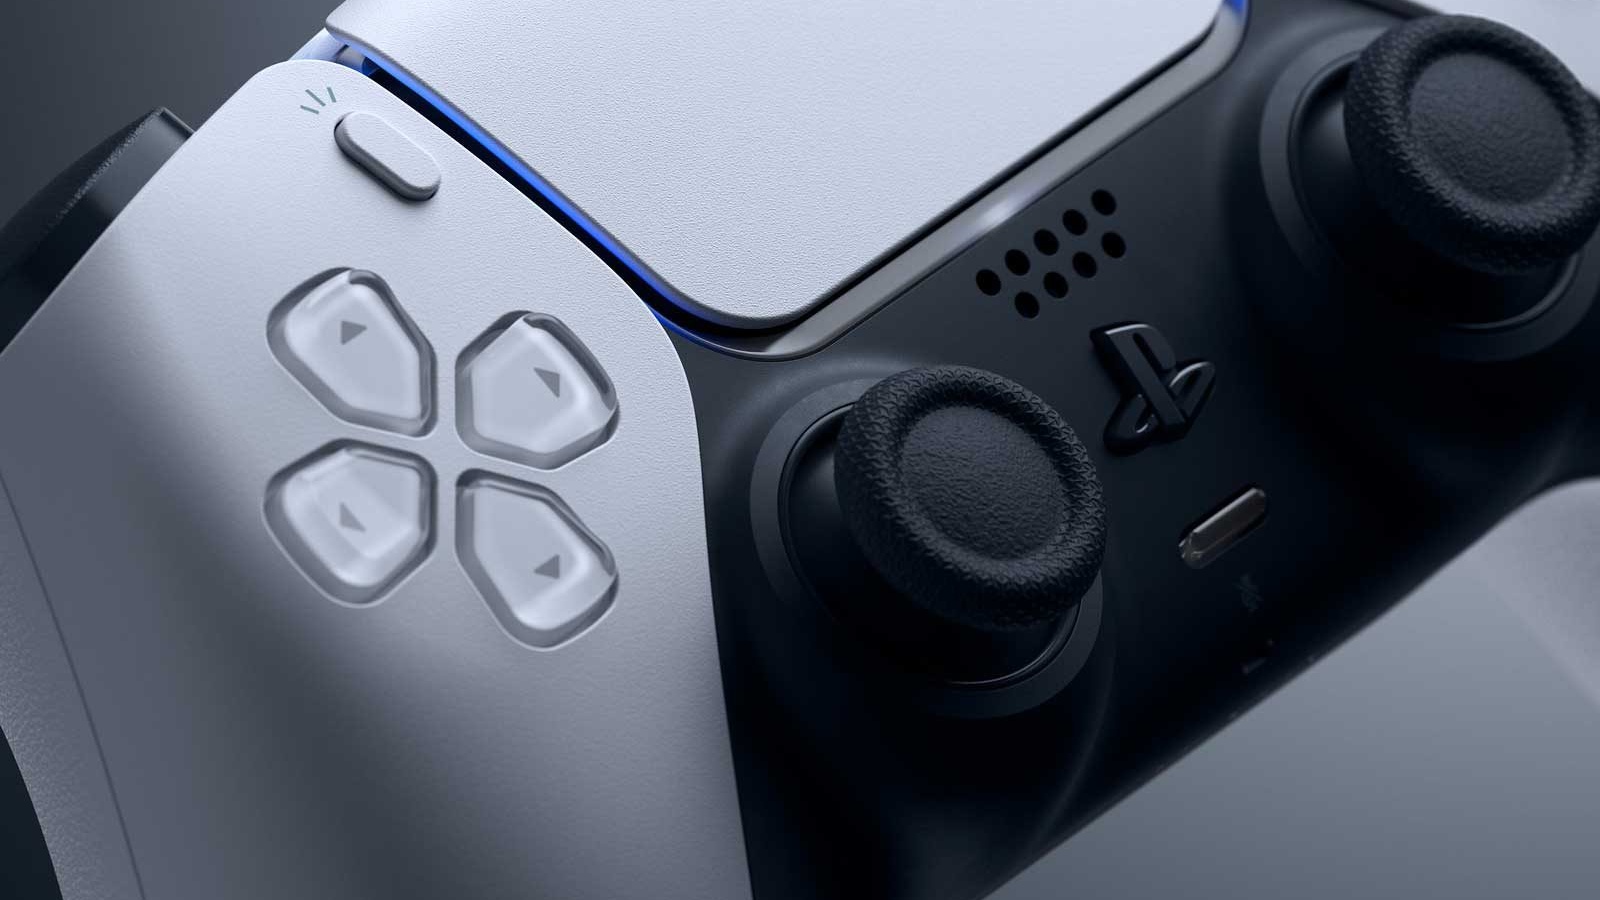 PlayStation 5 may drop in price soon as console revamp rumors rise - Dexerto